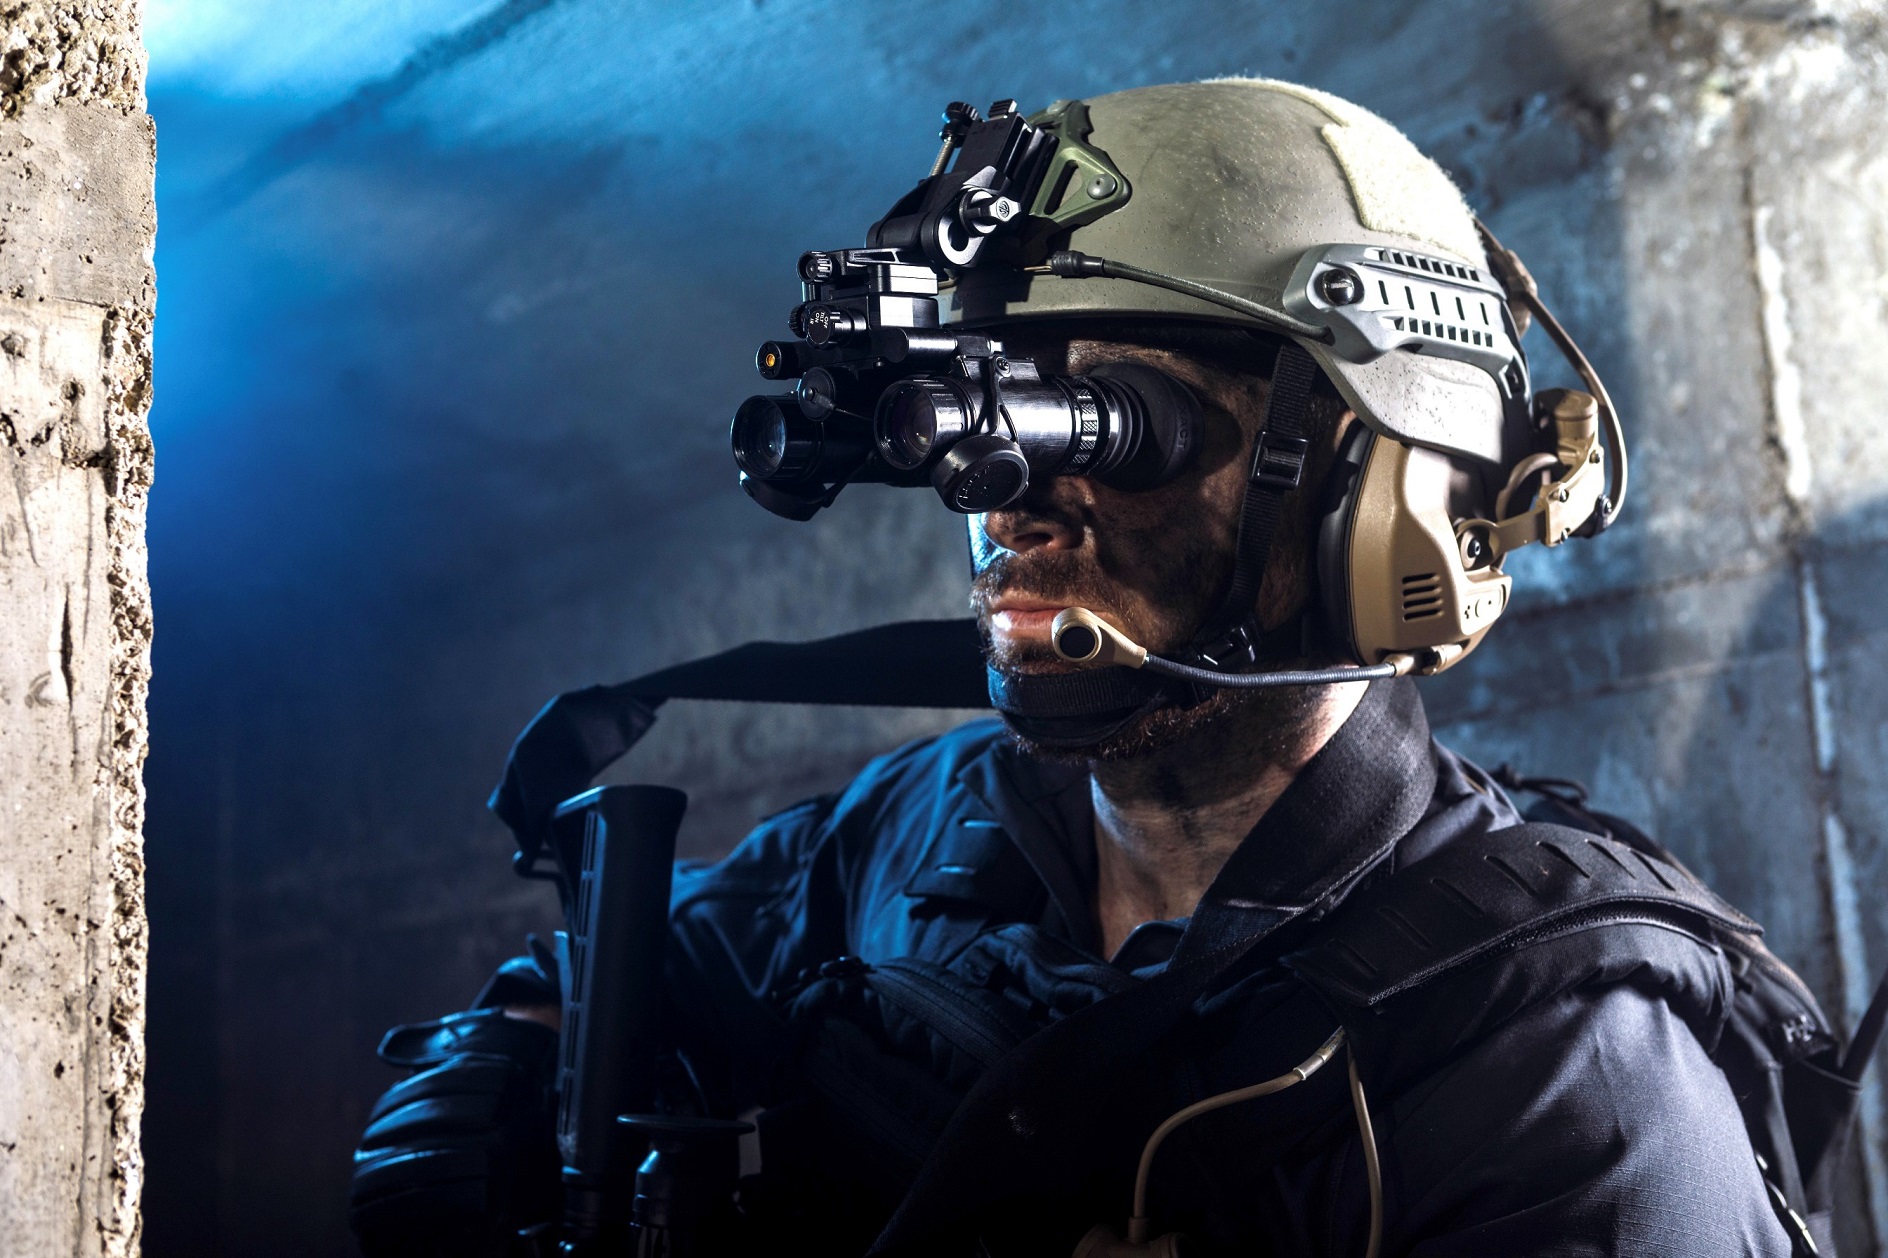 Elbit Systems will supply UK Armed Forces with lightweight micro binocular XACT nv33 NVGs in a helmet-mounted configuration. Click to enlarge.